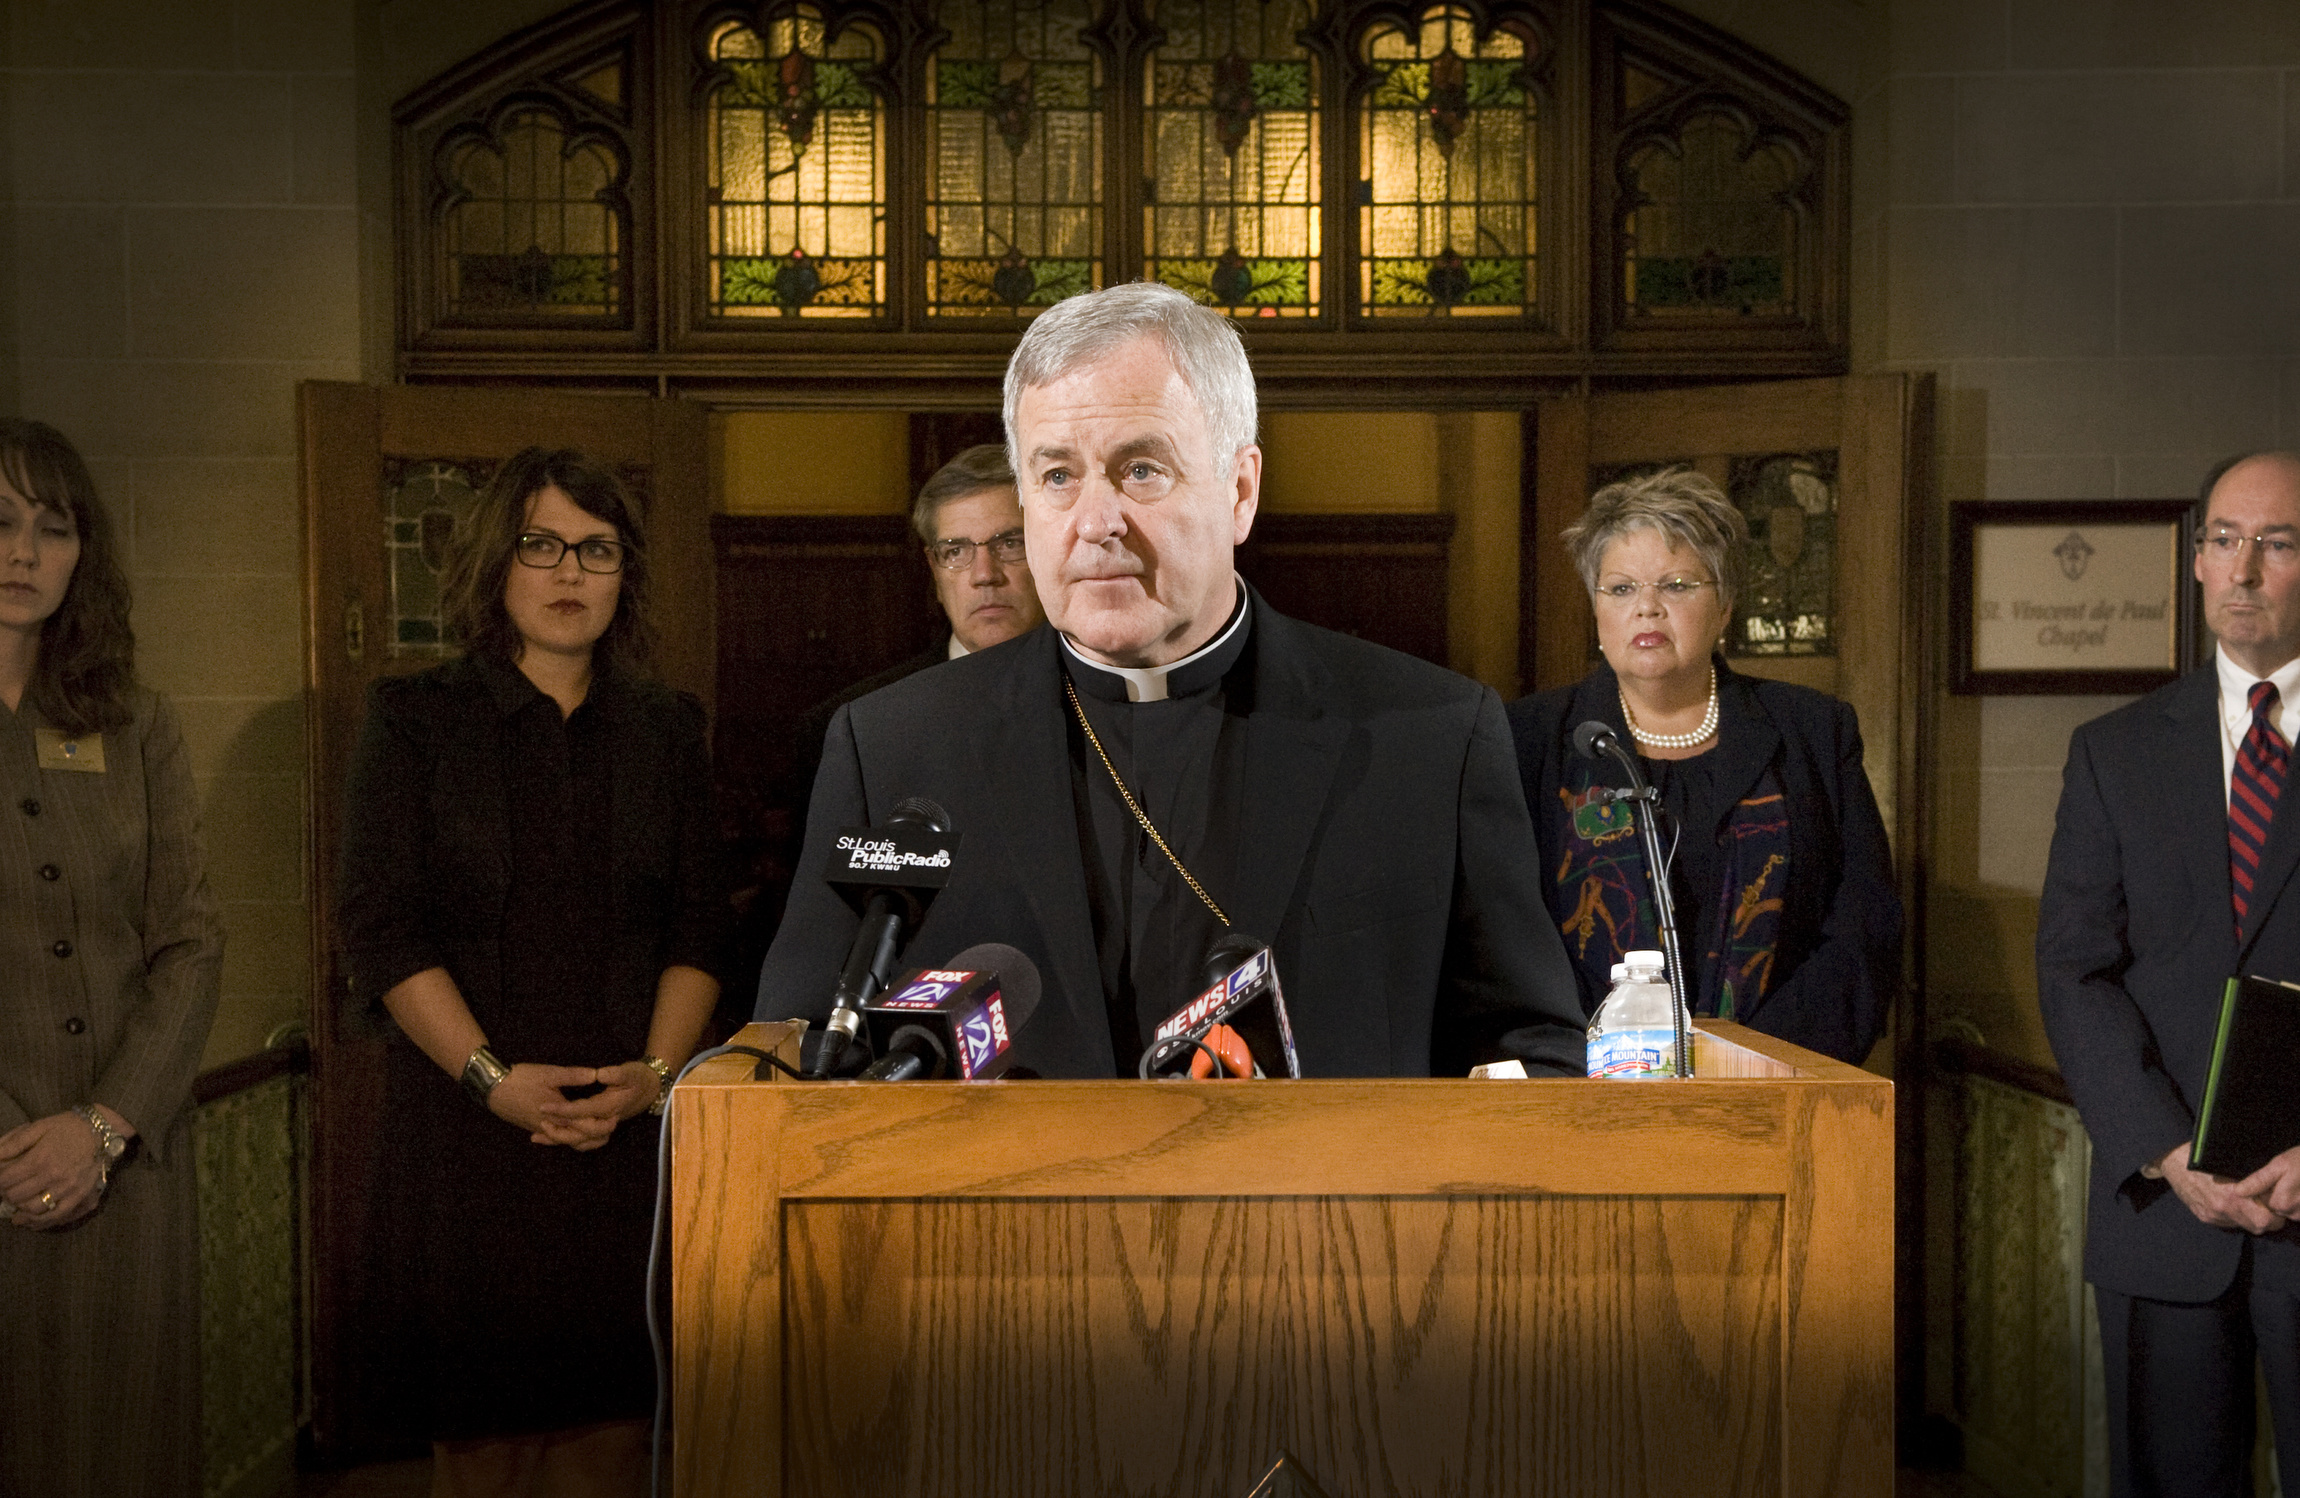 Archbishop Robert J. Carlson announces in May that the Archdiocese of St. Louis and Catholic Charities of St. Louis are among 43 Catholic entities filing suit against implementation of the HHS mandate. (CNS photo/Lisa Johnston, St. Louis Review)